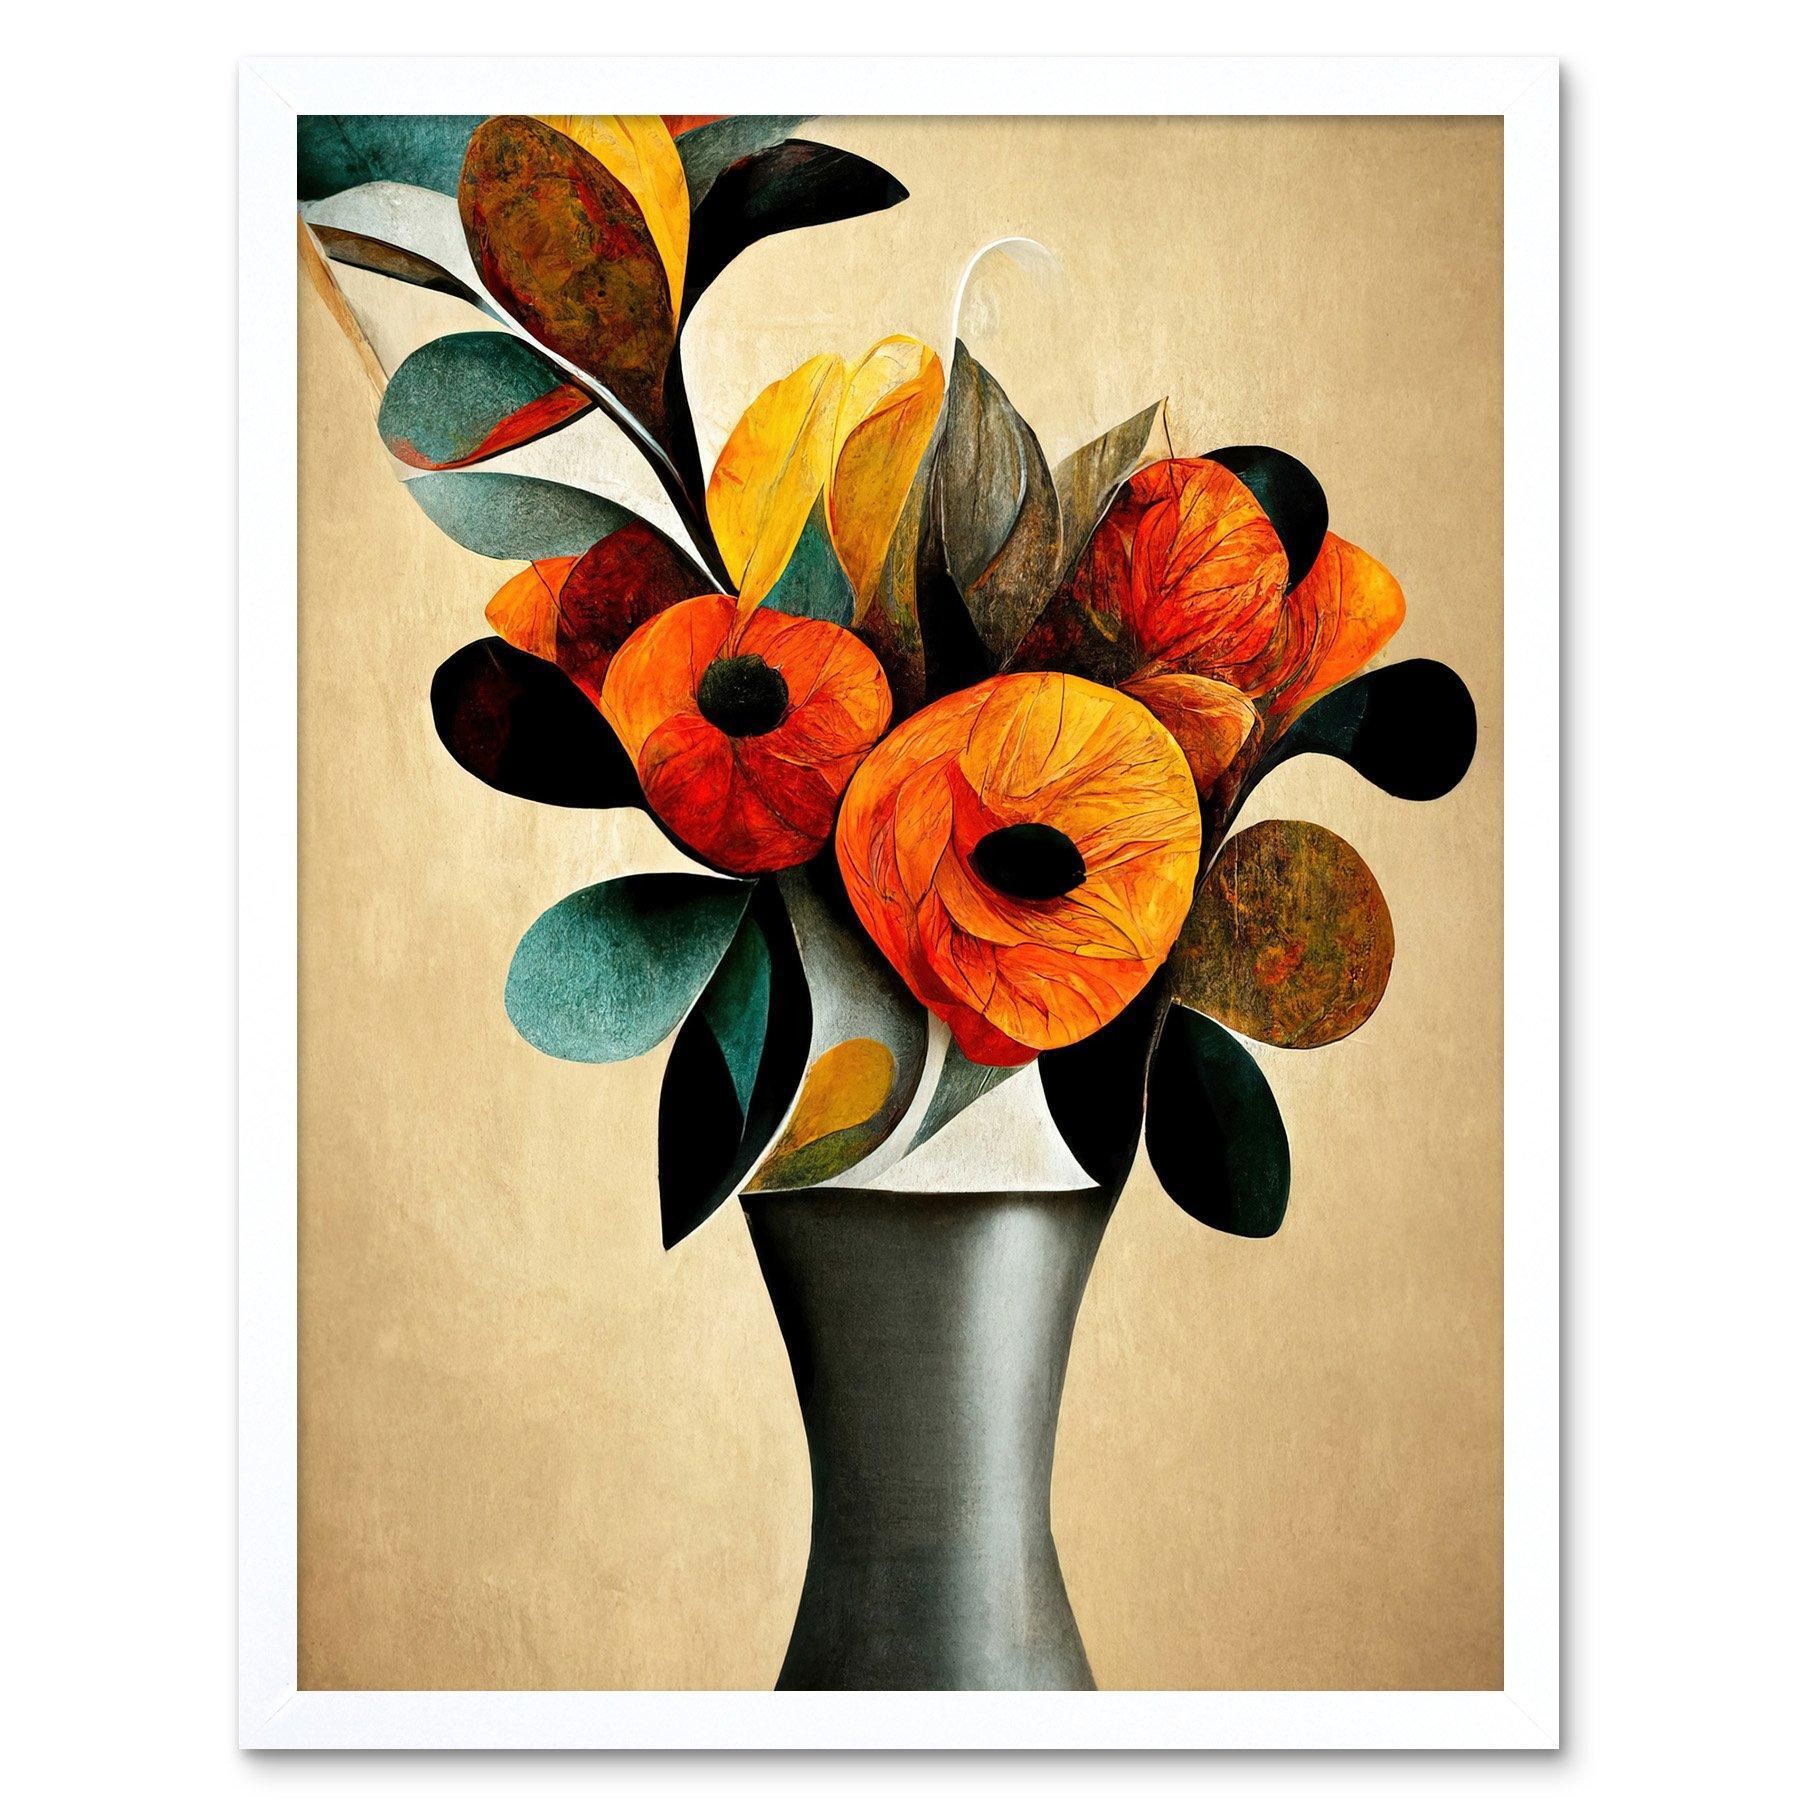 Abstract Autumn Field Flower Bouquet Silver Vase Orange Art Print Framed Poster Wall Decor 12x16 inch - image 1